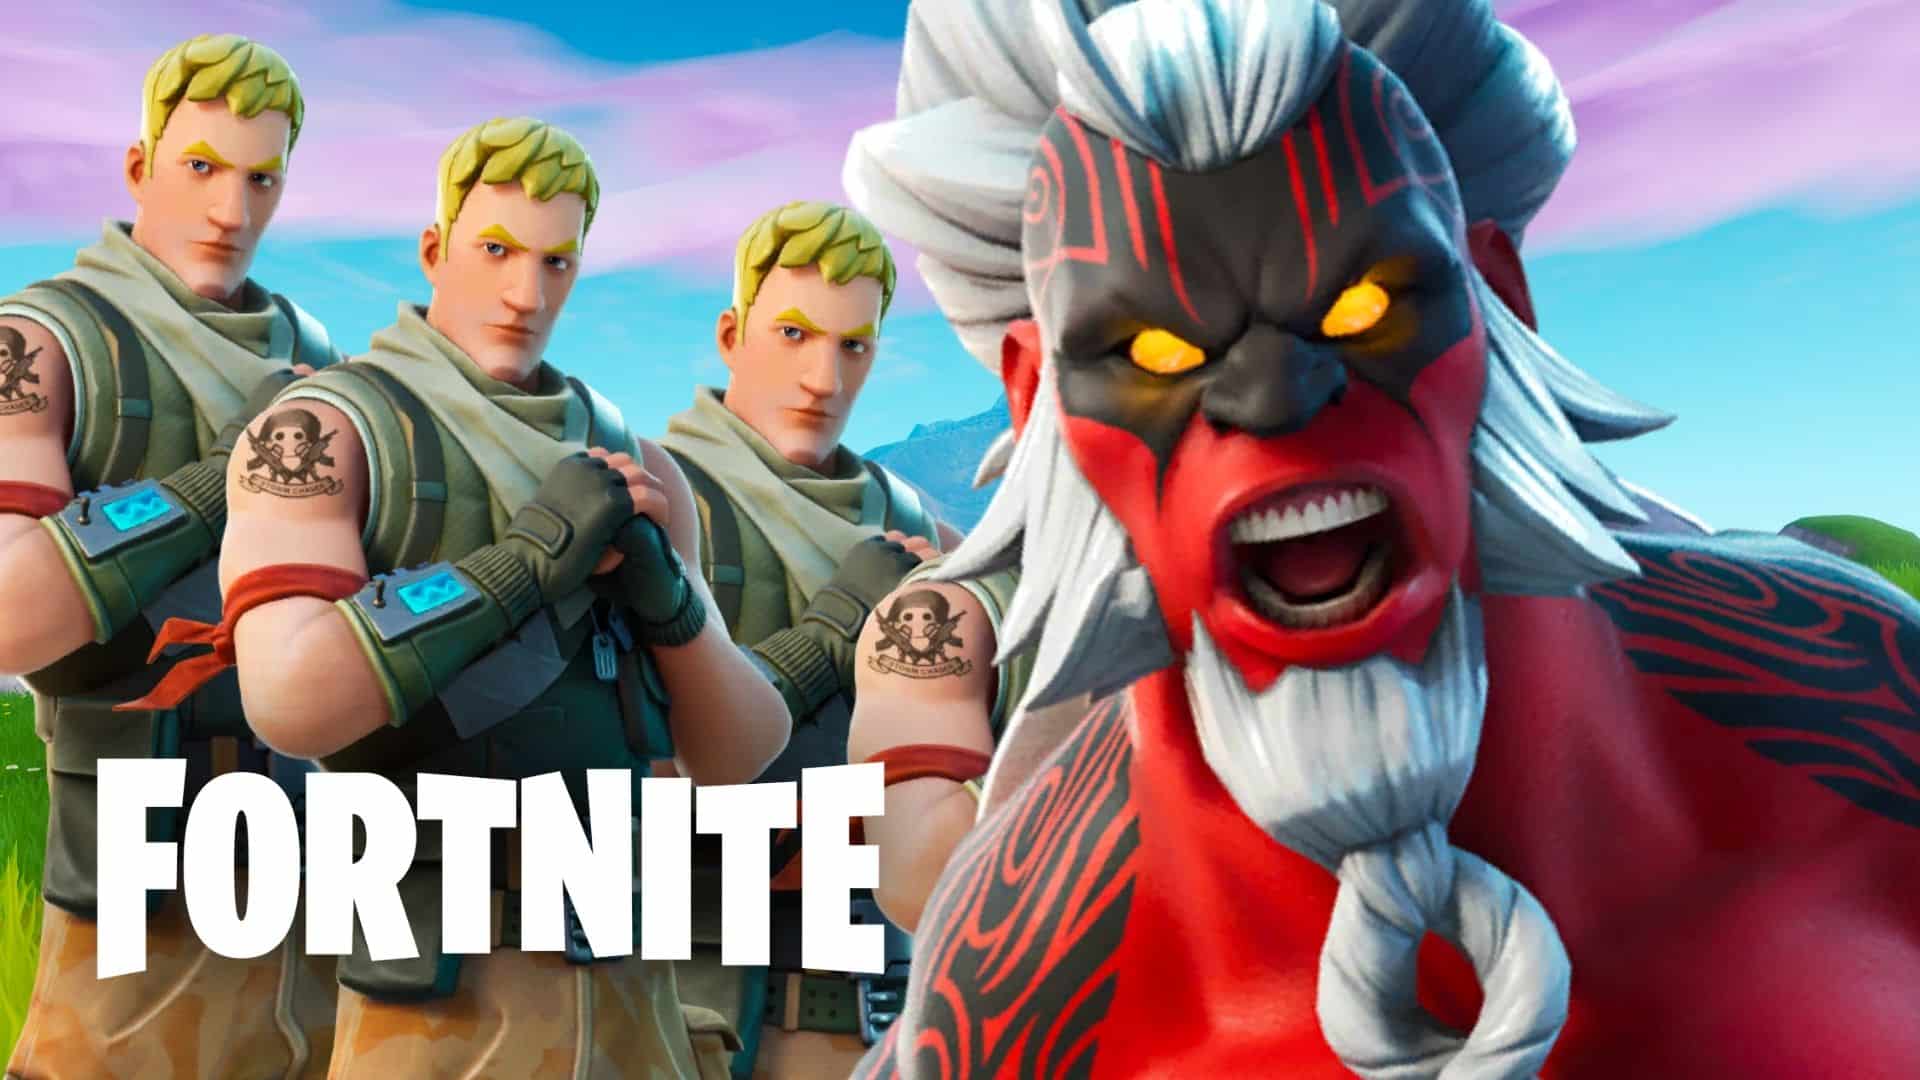 How many skins are in Fortnite?